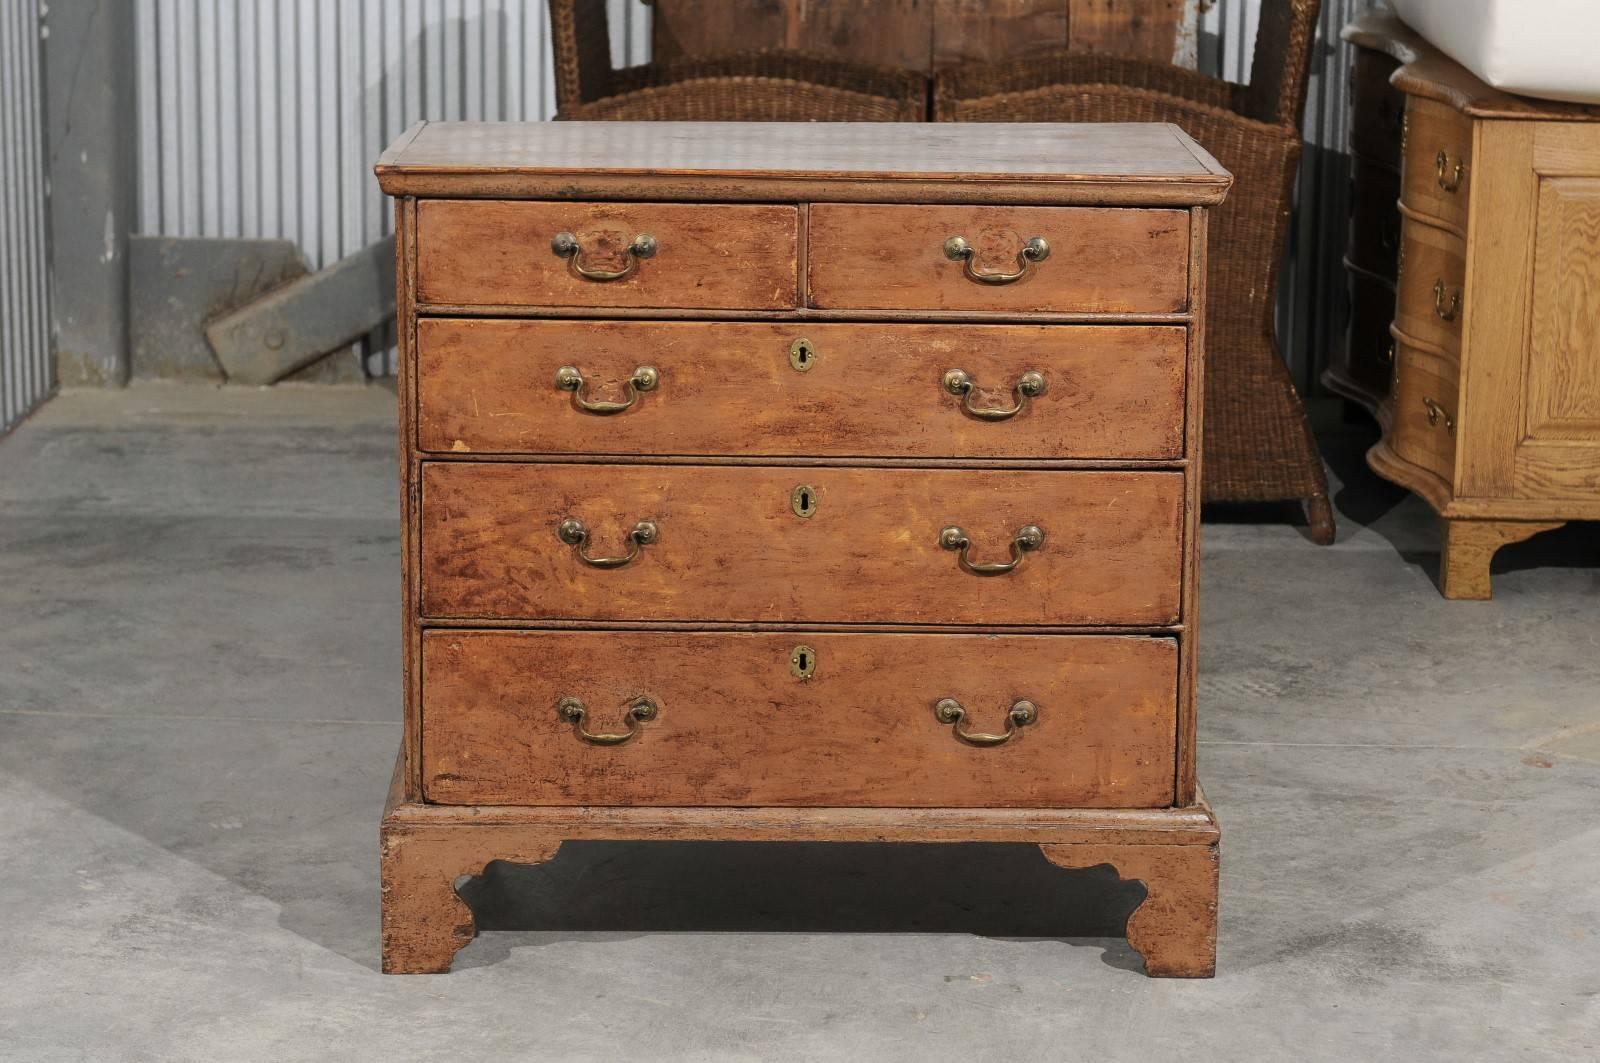 An English George III period four-drawer painted wood chest with bracket feet from the early 1800s. This English Georgian chest features a rectangular top sitting above two small drawers. Three larger graduated drawers make up the rest of the